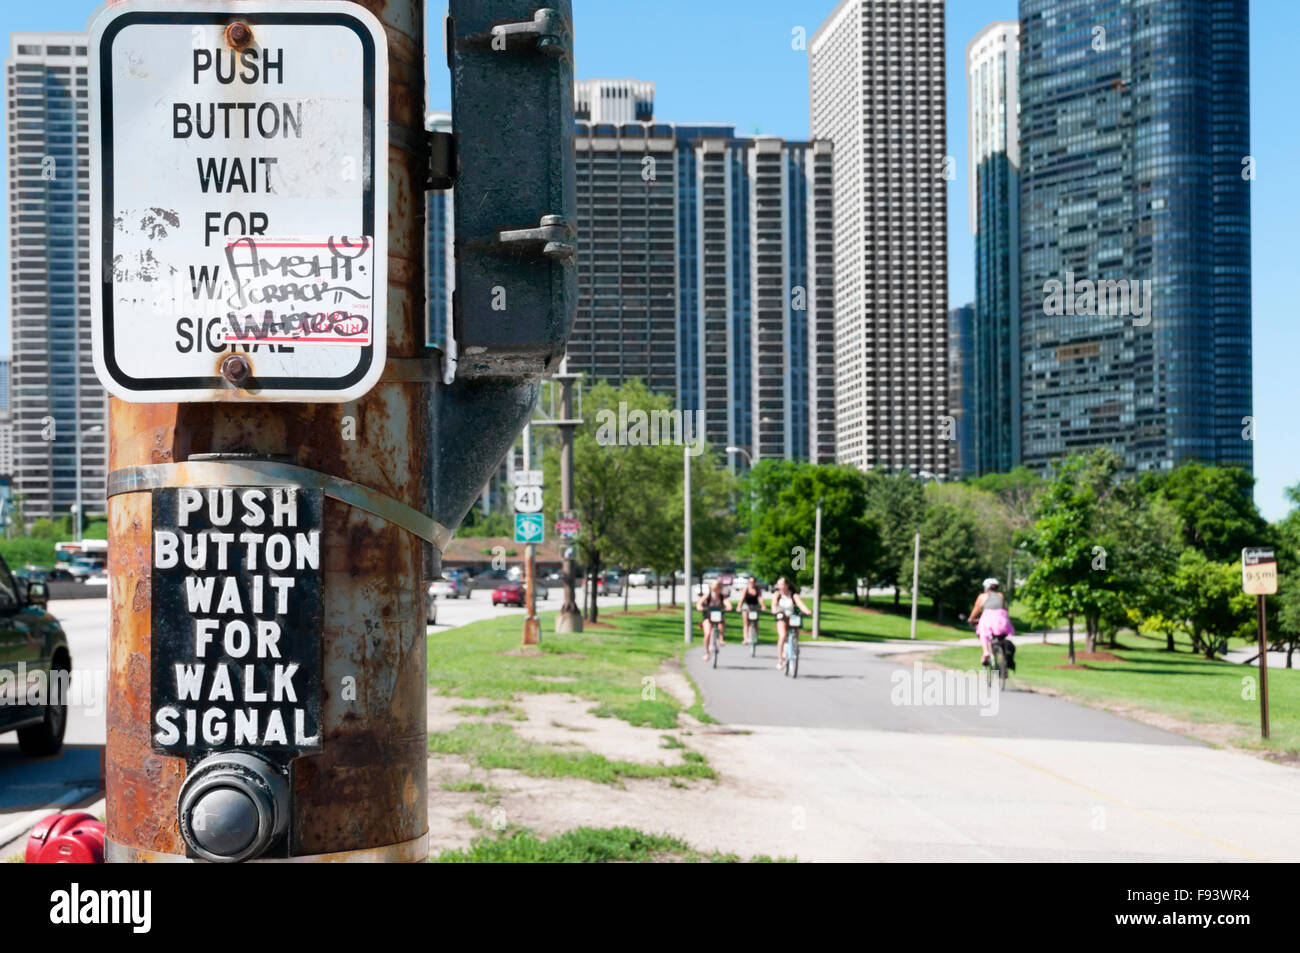 A Push Button Wait For Walk Signal sign. Stock Photo